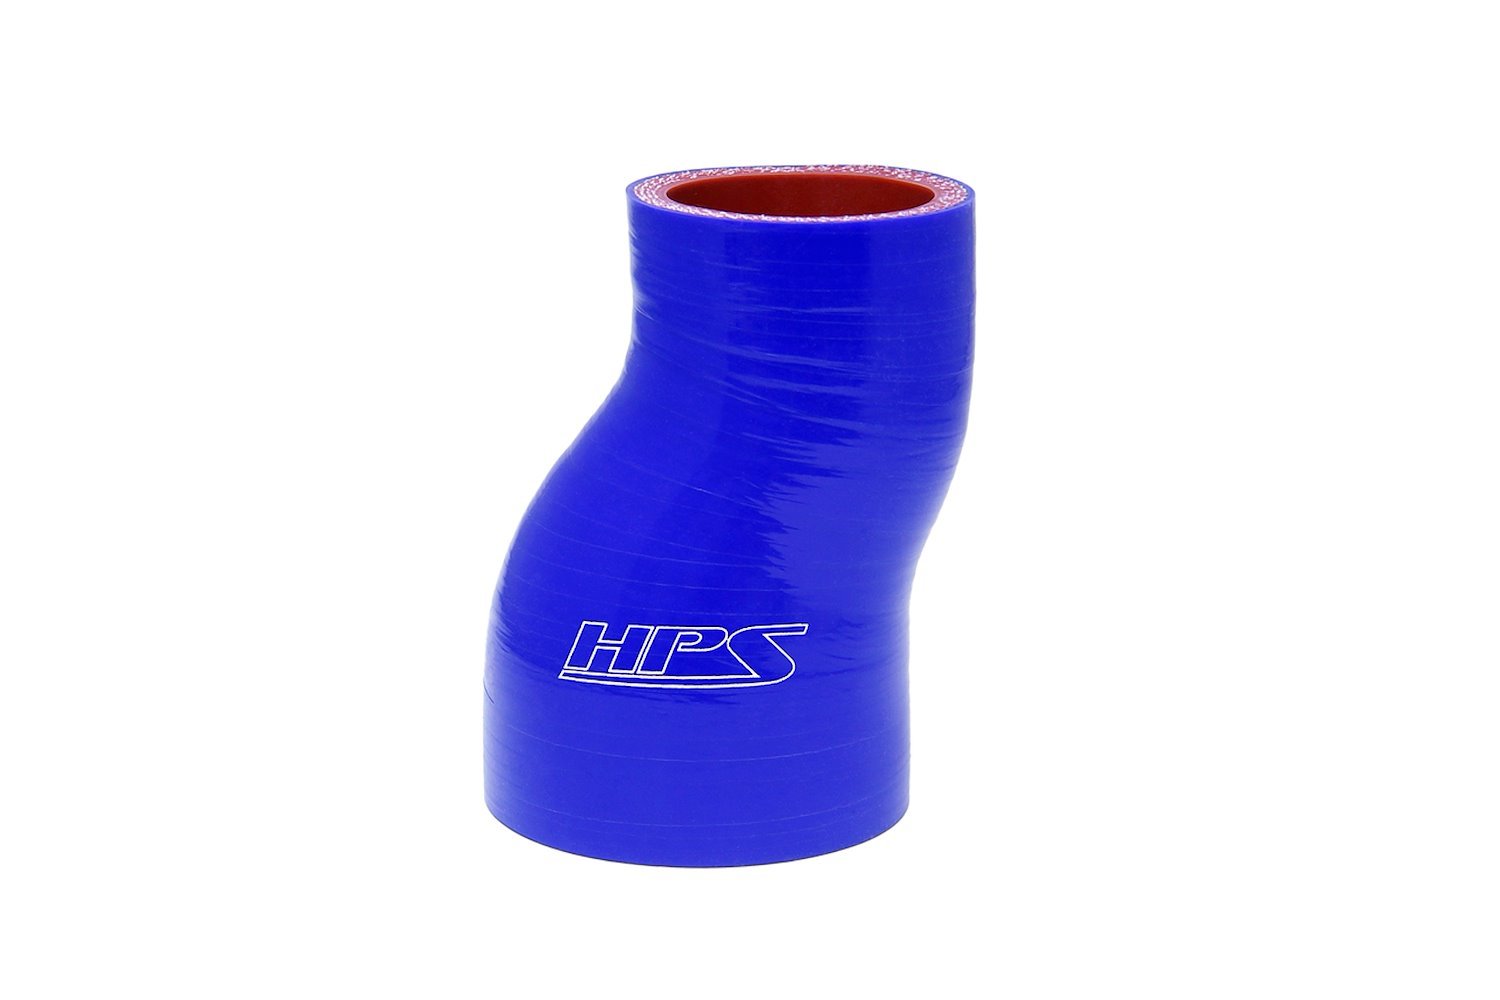 HTSOR-175-200-BLUE Silicone Offset Reducer Hose, High-Temp Reinforced, 1-3/4 in. - 2 in. ID, 3 in. Long, Blue